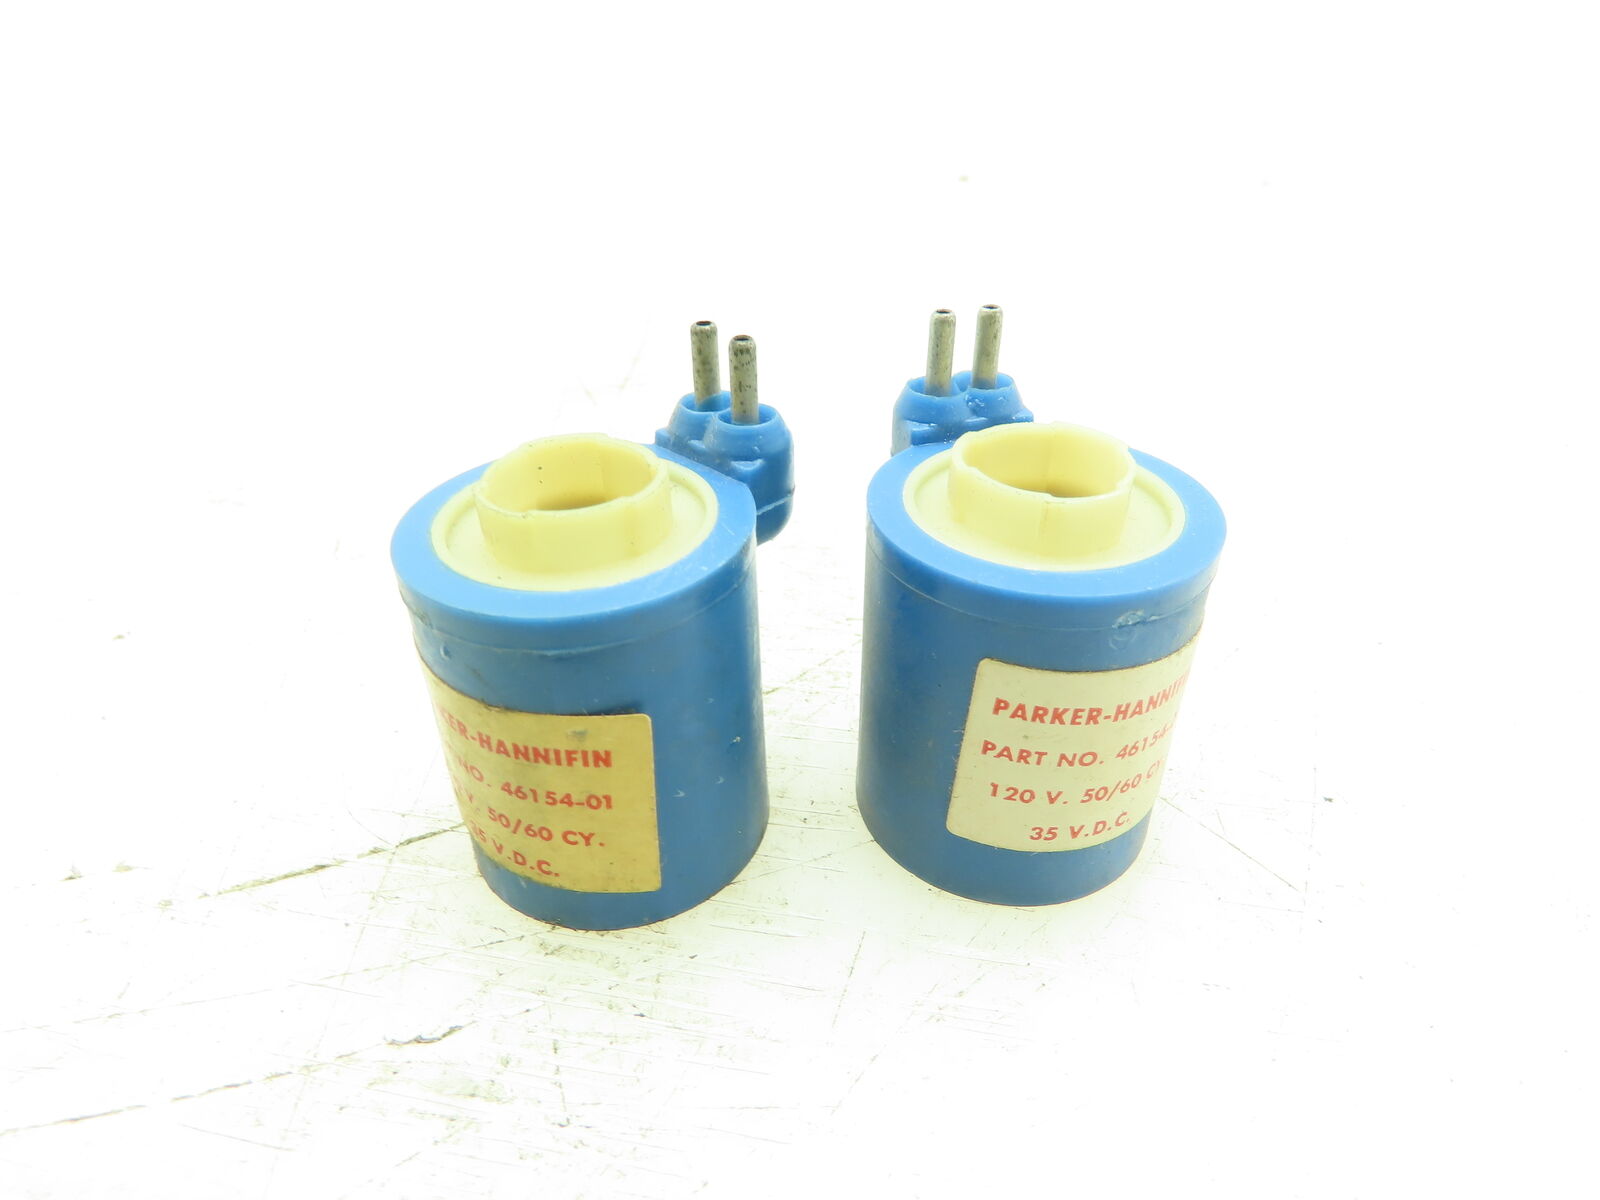 Parker Hannifin 46154-01 Solenoid Coil 120V 35VDC Round 2-Pin Plug-In  LOT OF 2